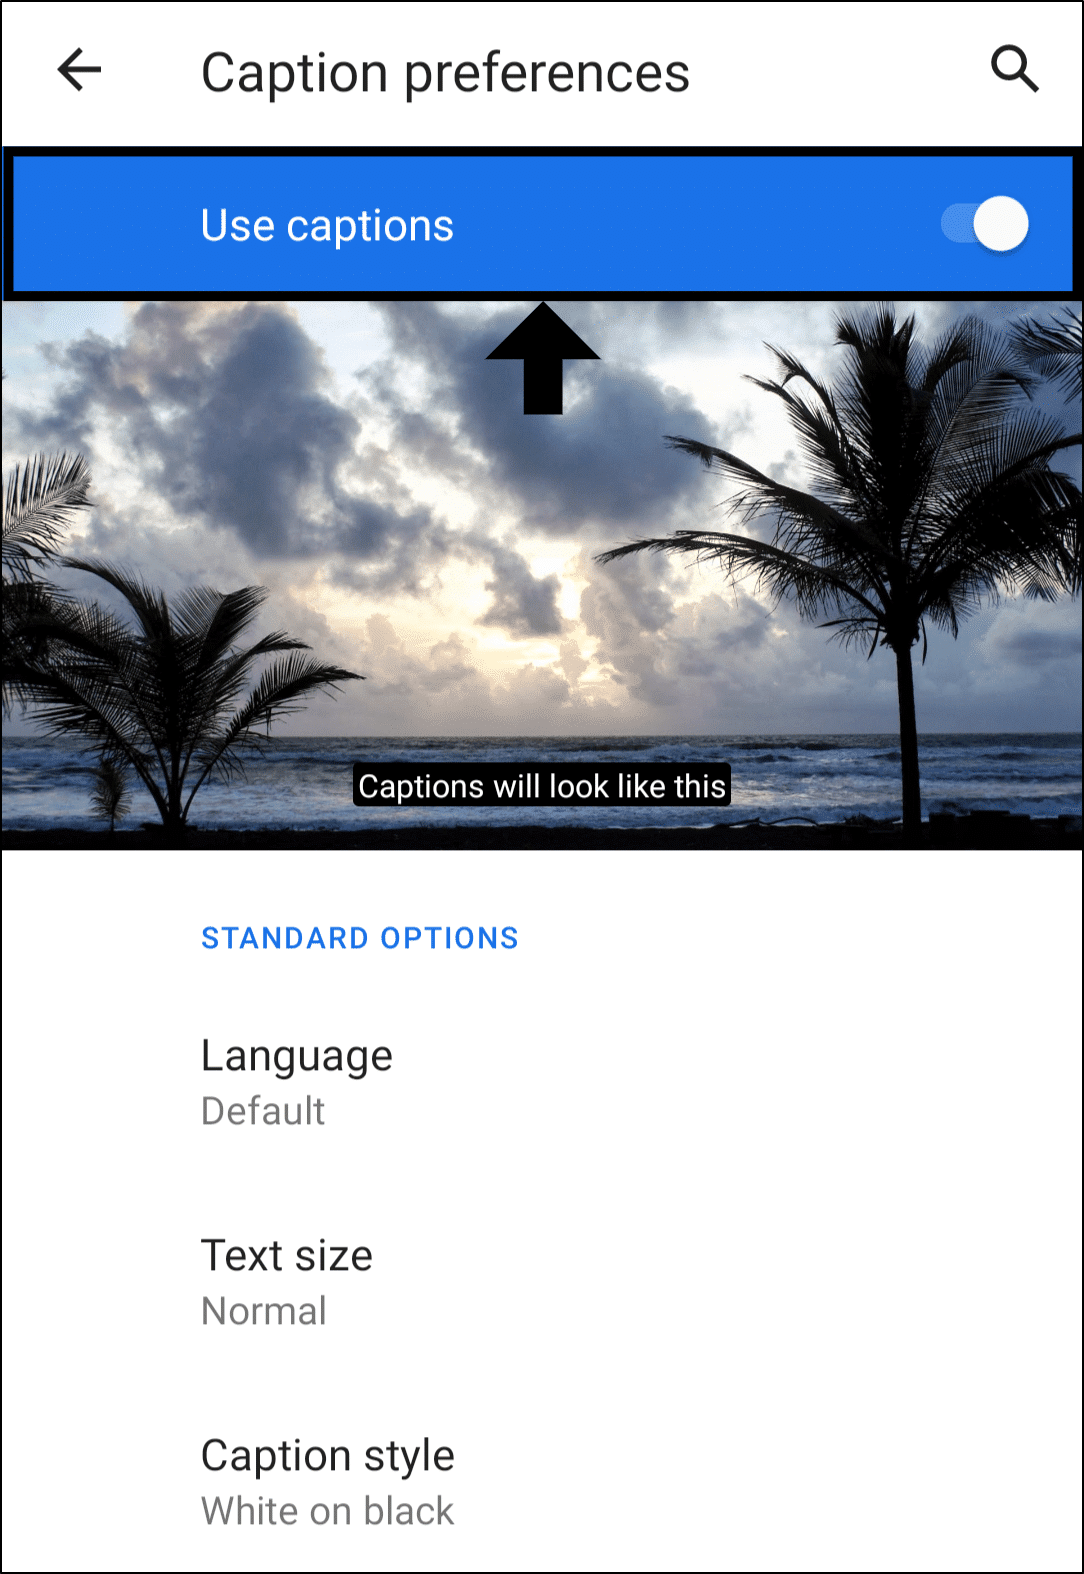 enable closed captioning on Android to fix subtitles missing